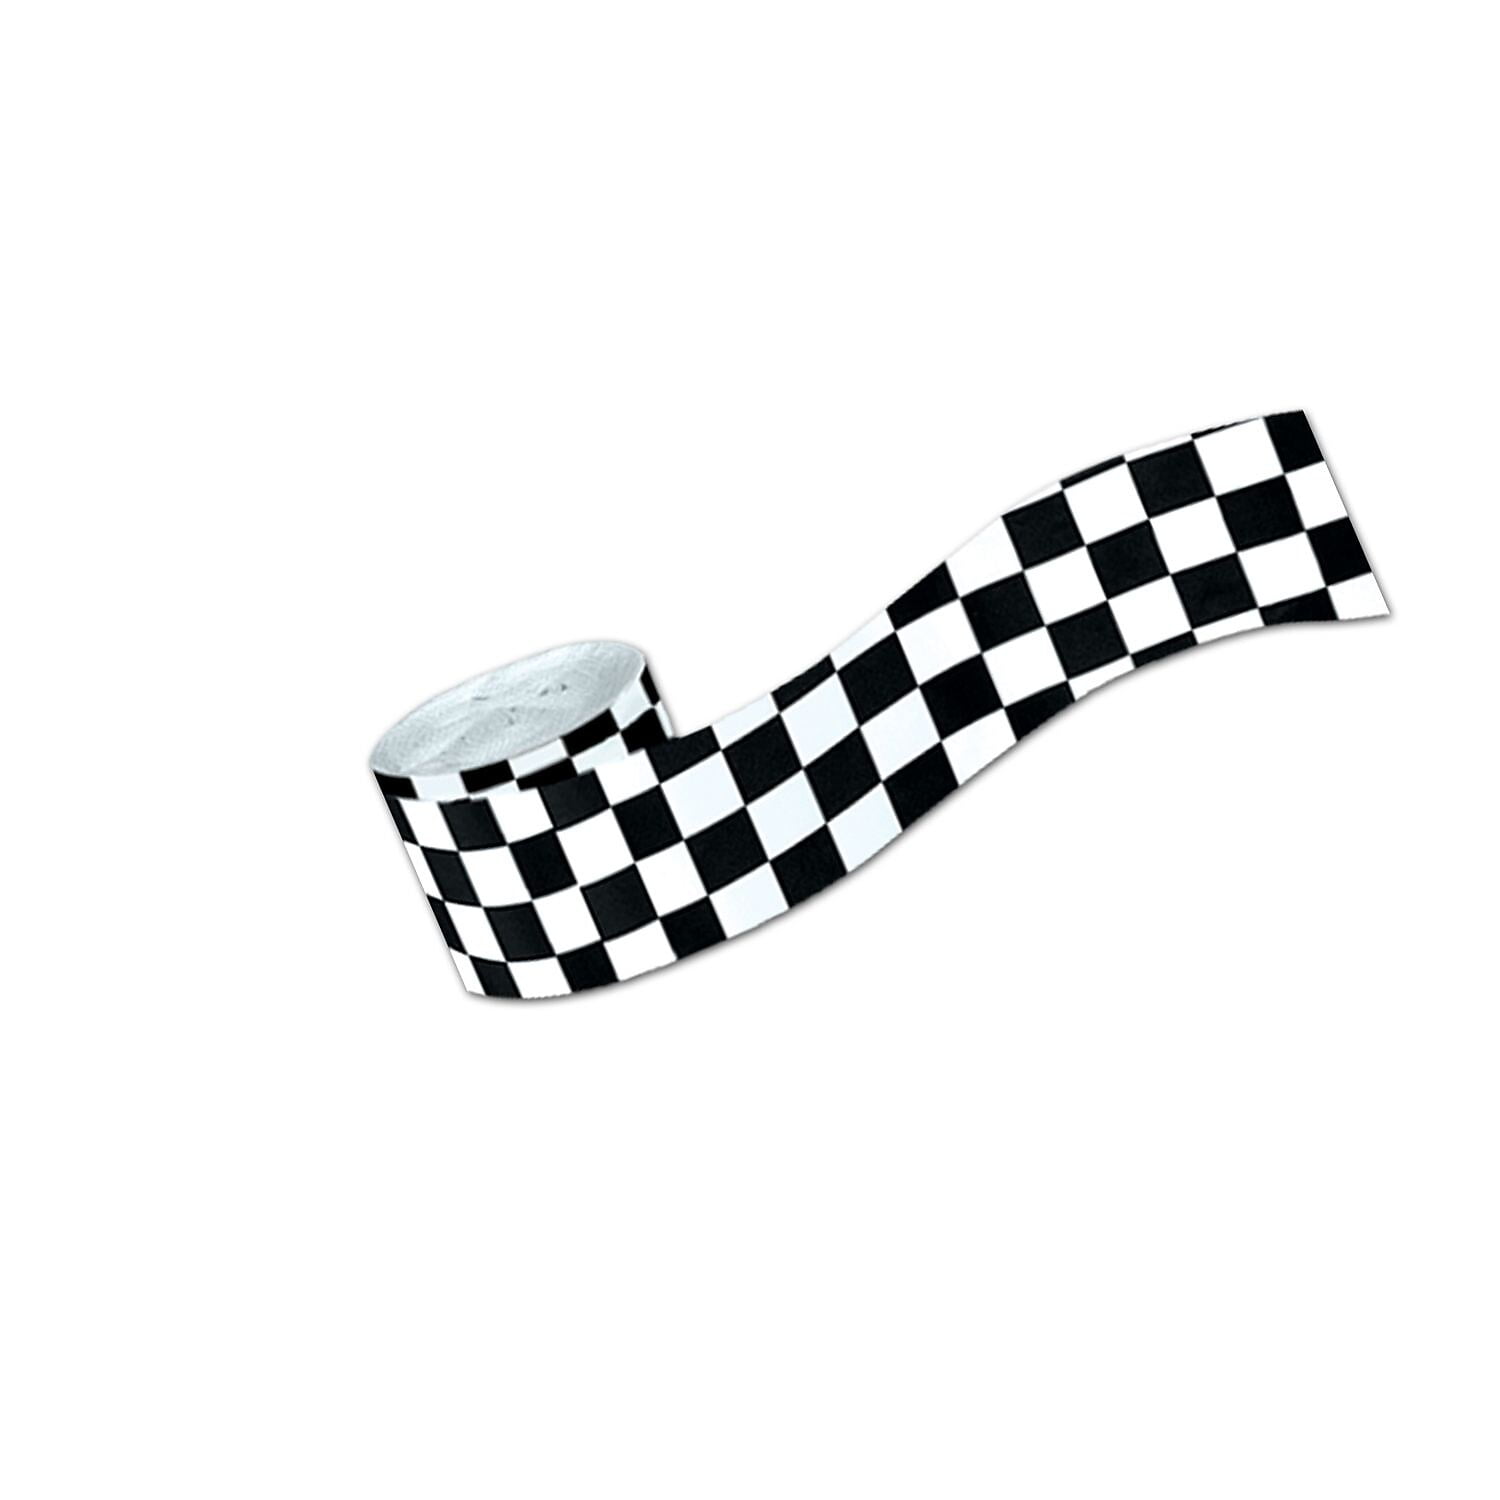 Beistle 52089 Checkered Backdrop 4-Feet by 30-Feet